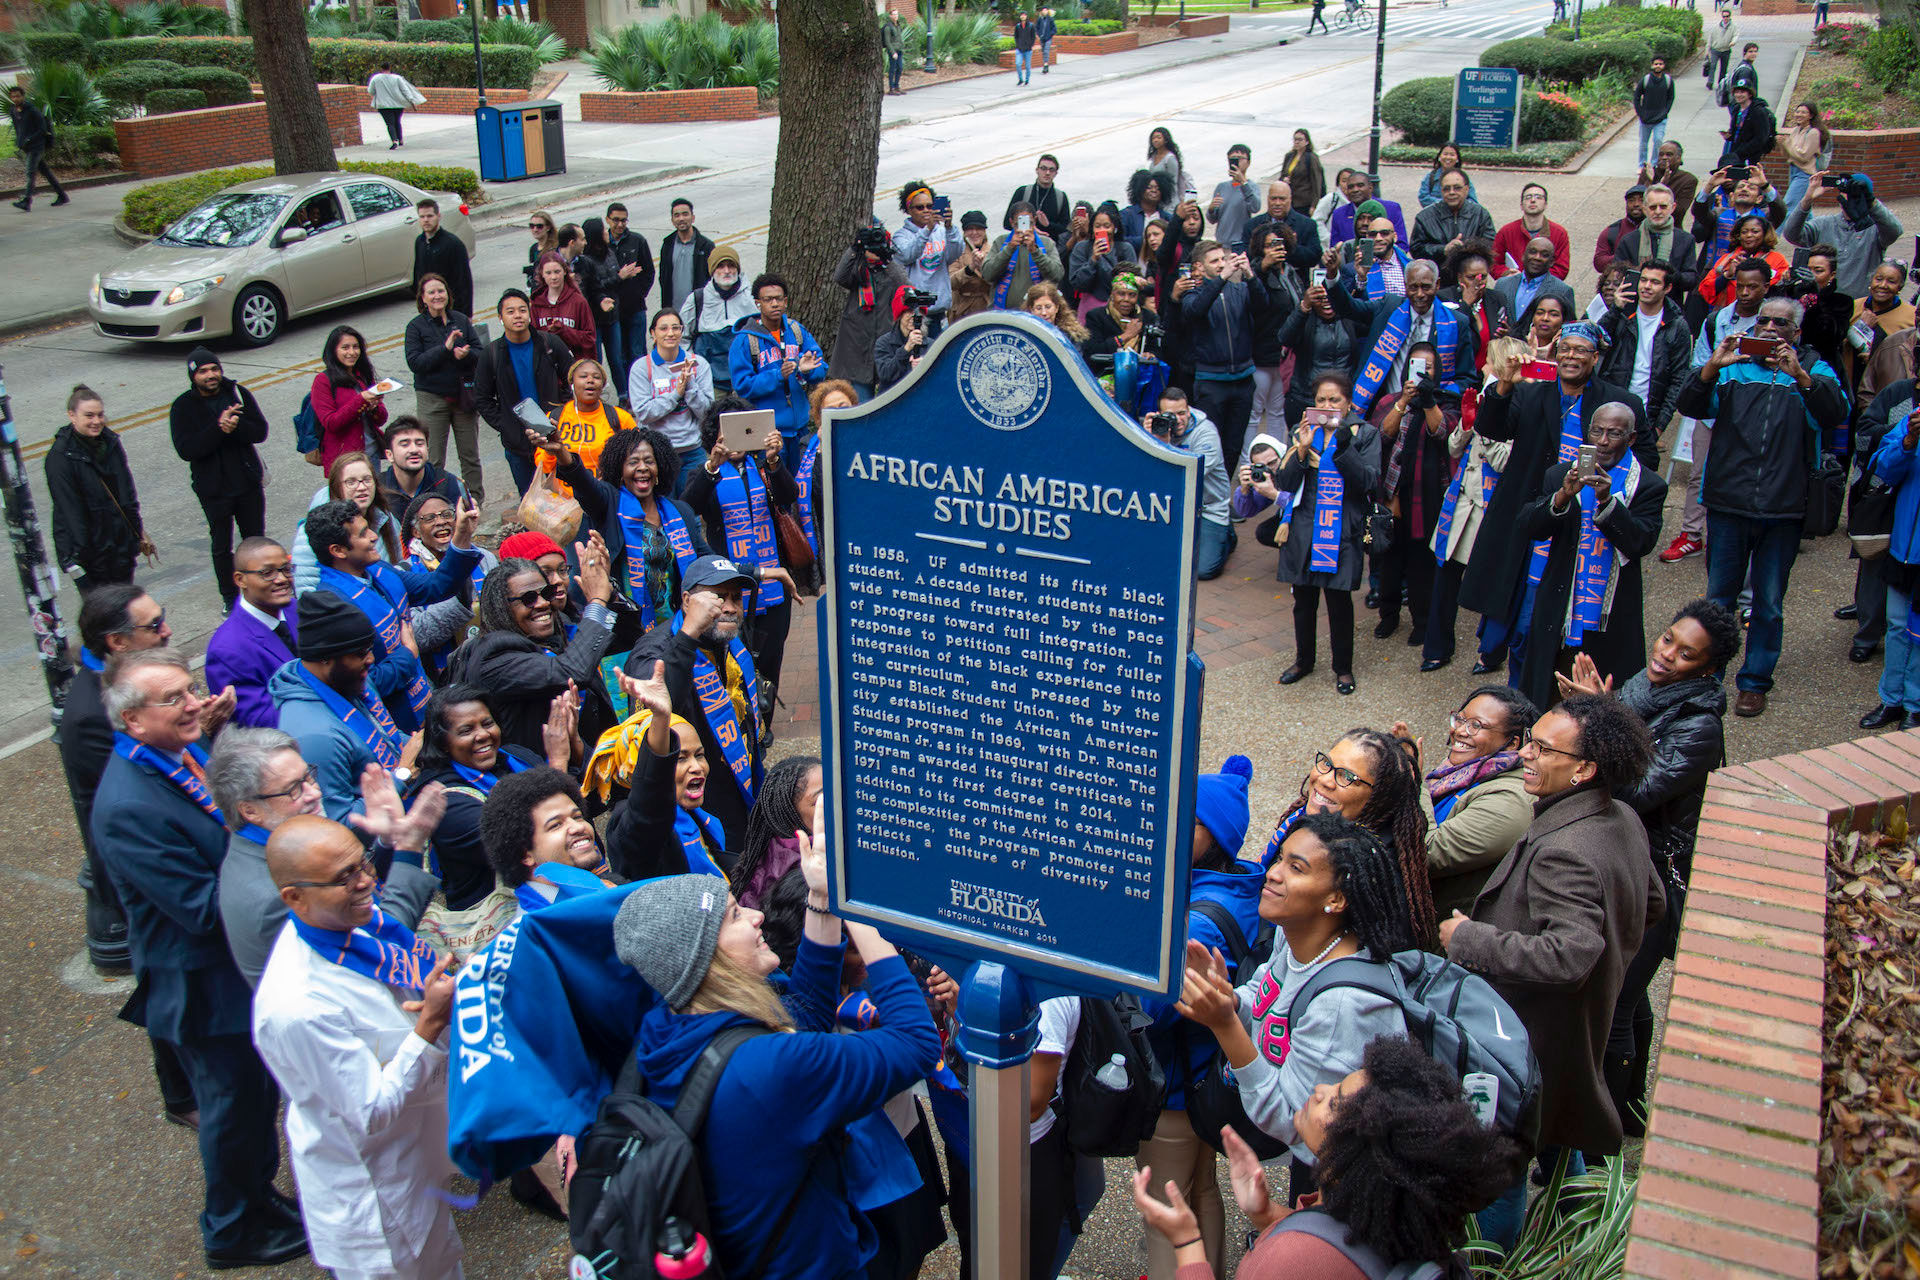 Dozens surround a historical marker which commemorates African Americans Studies 